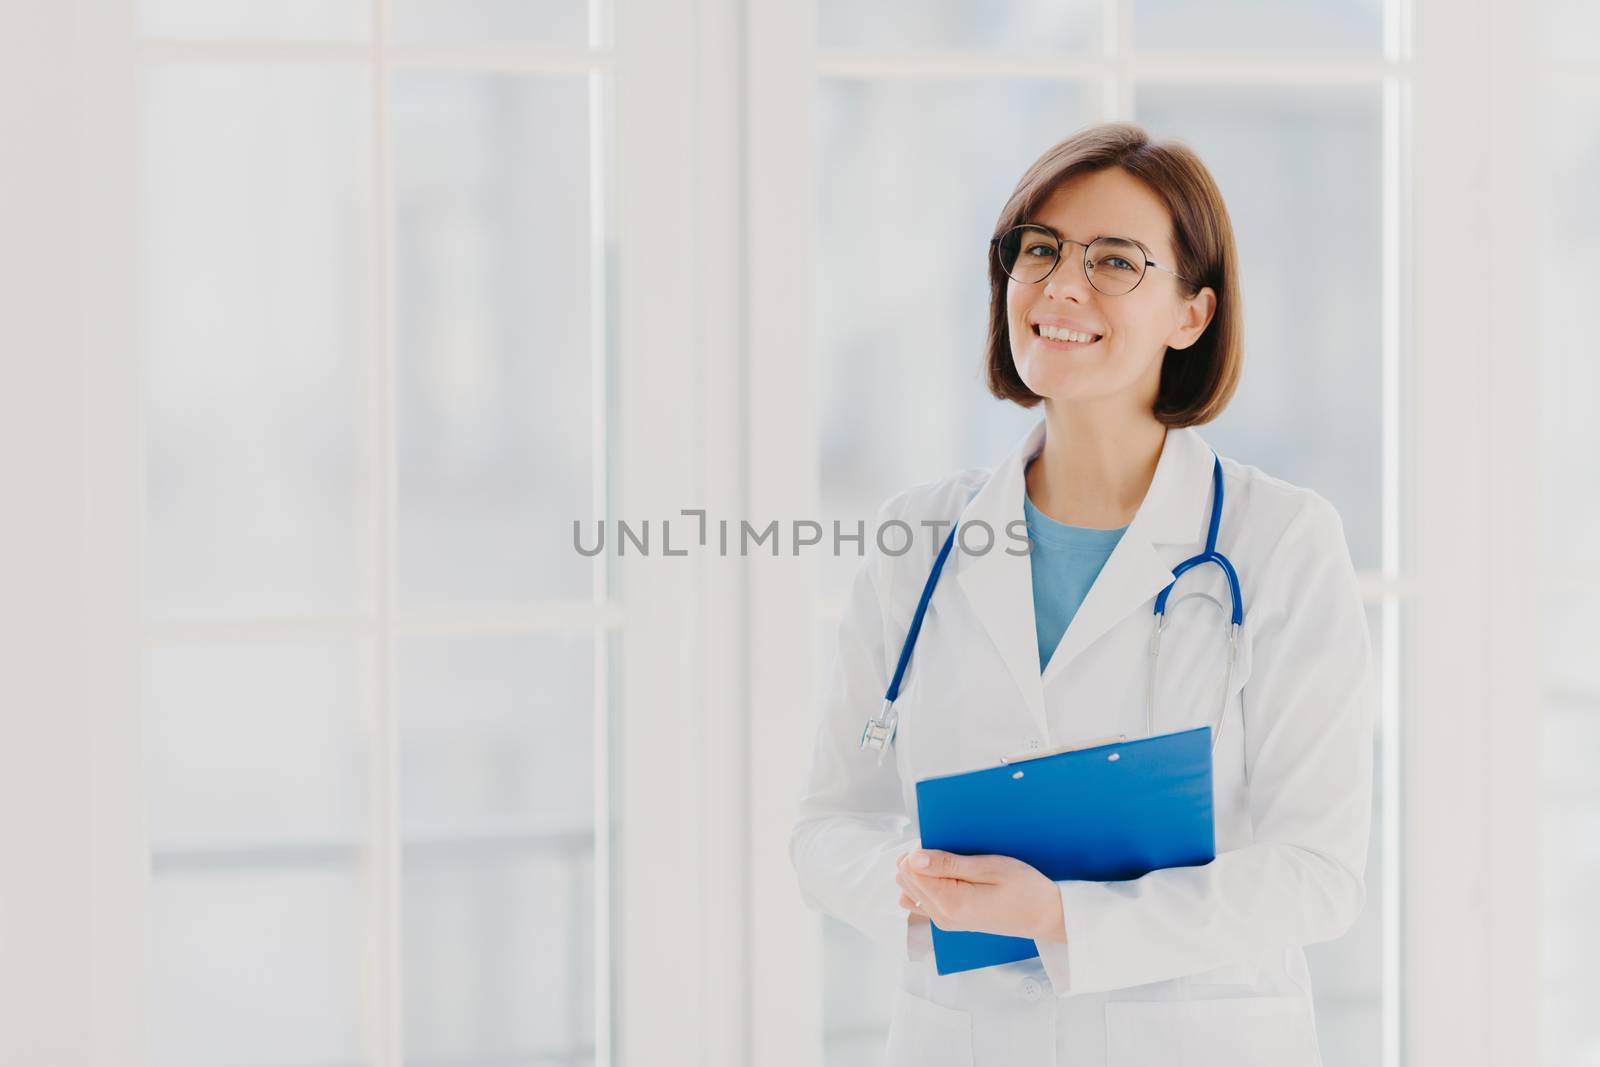 Experienced woman pediatrician stands with clipboard in cabinet, wears white medical coat with stethoscope, gives excellent medical treatment, has happy expression, ready to give consultancy